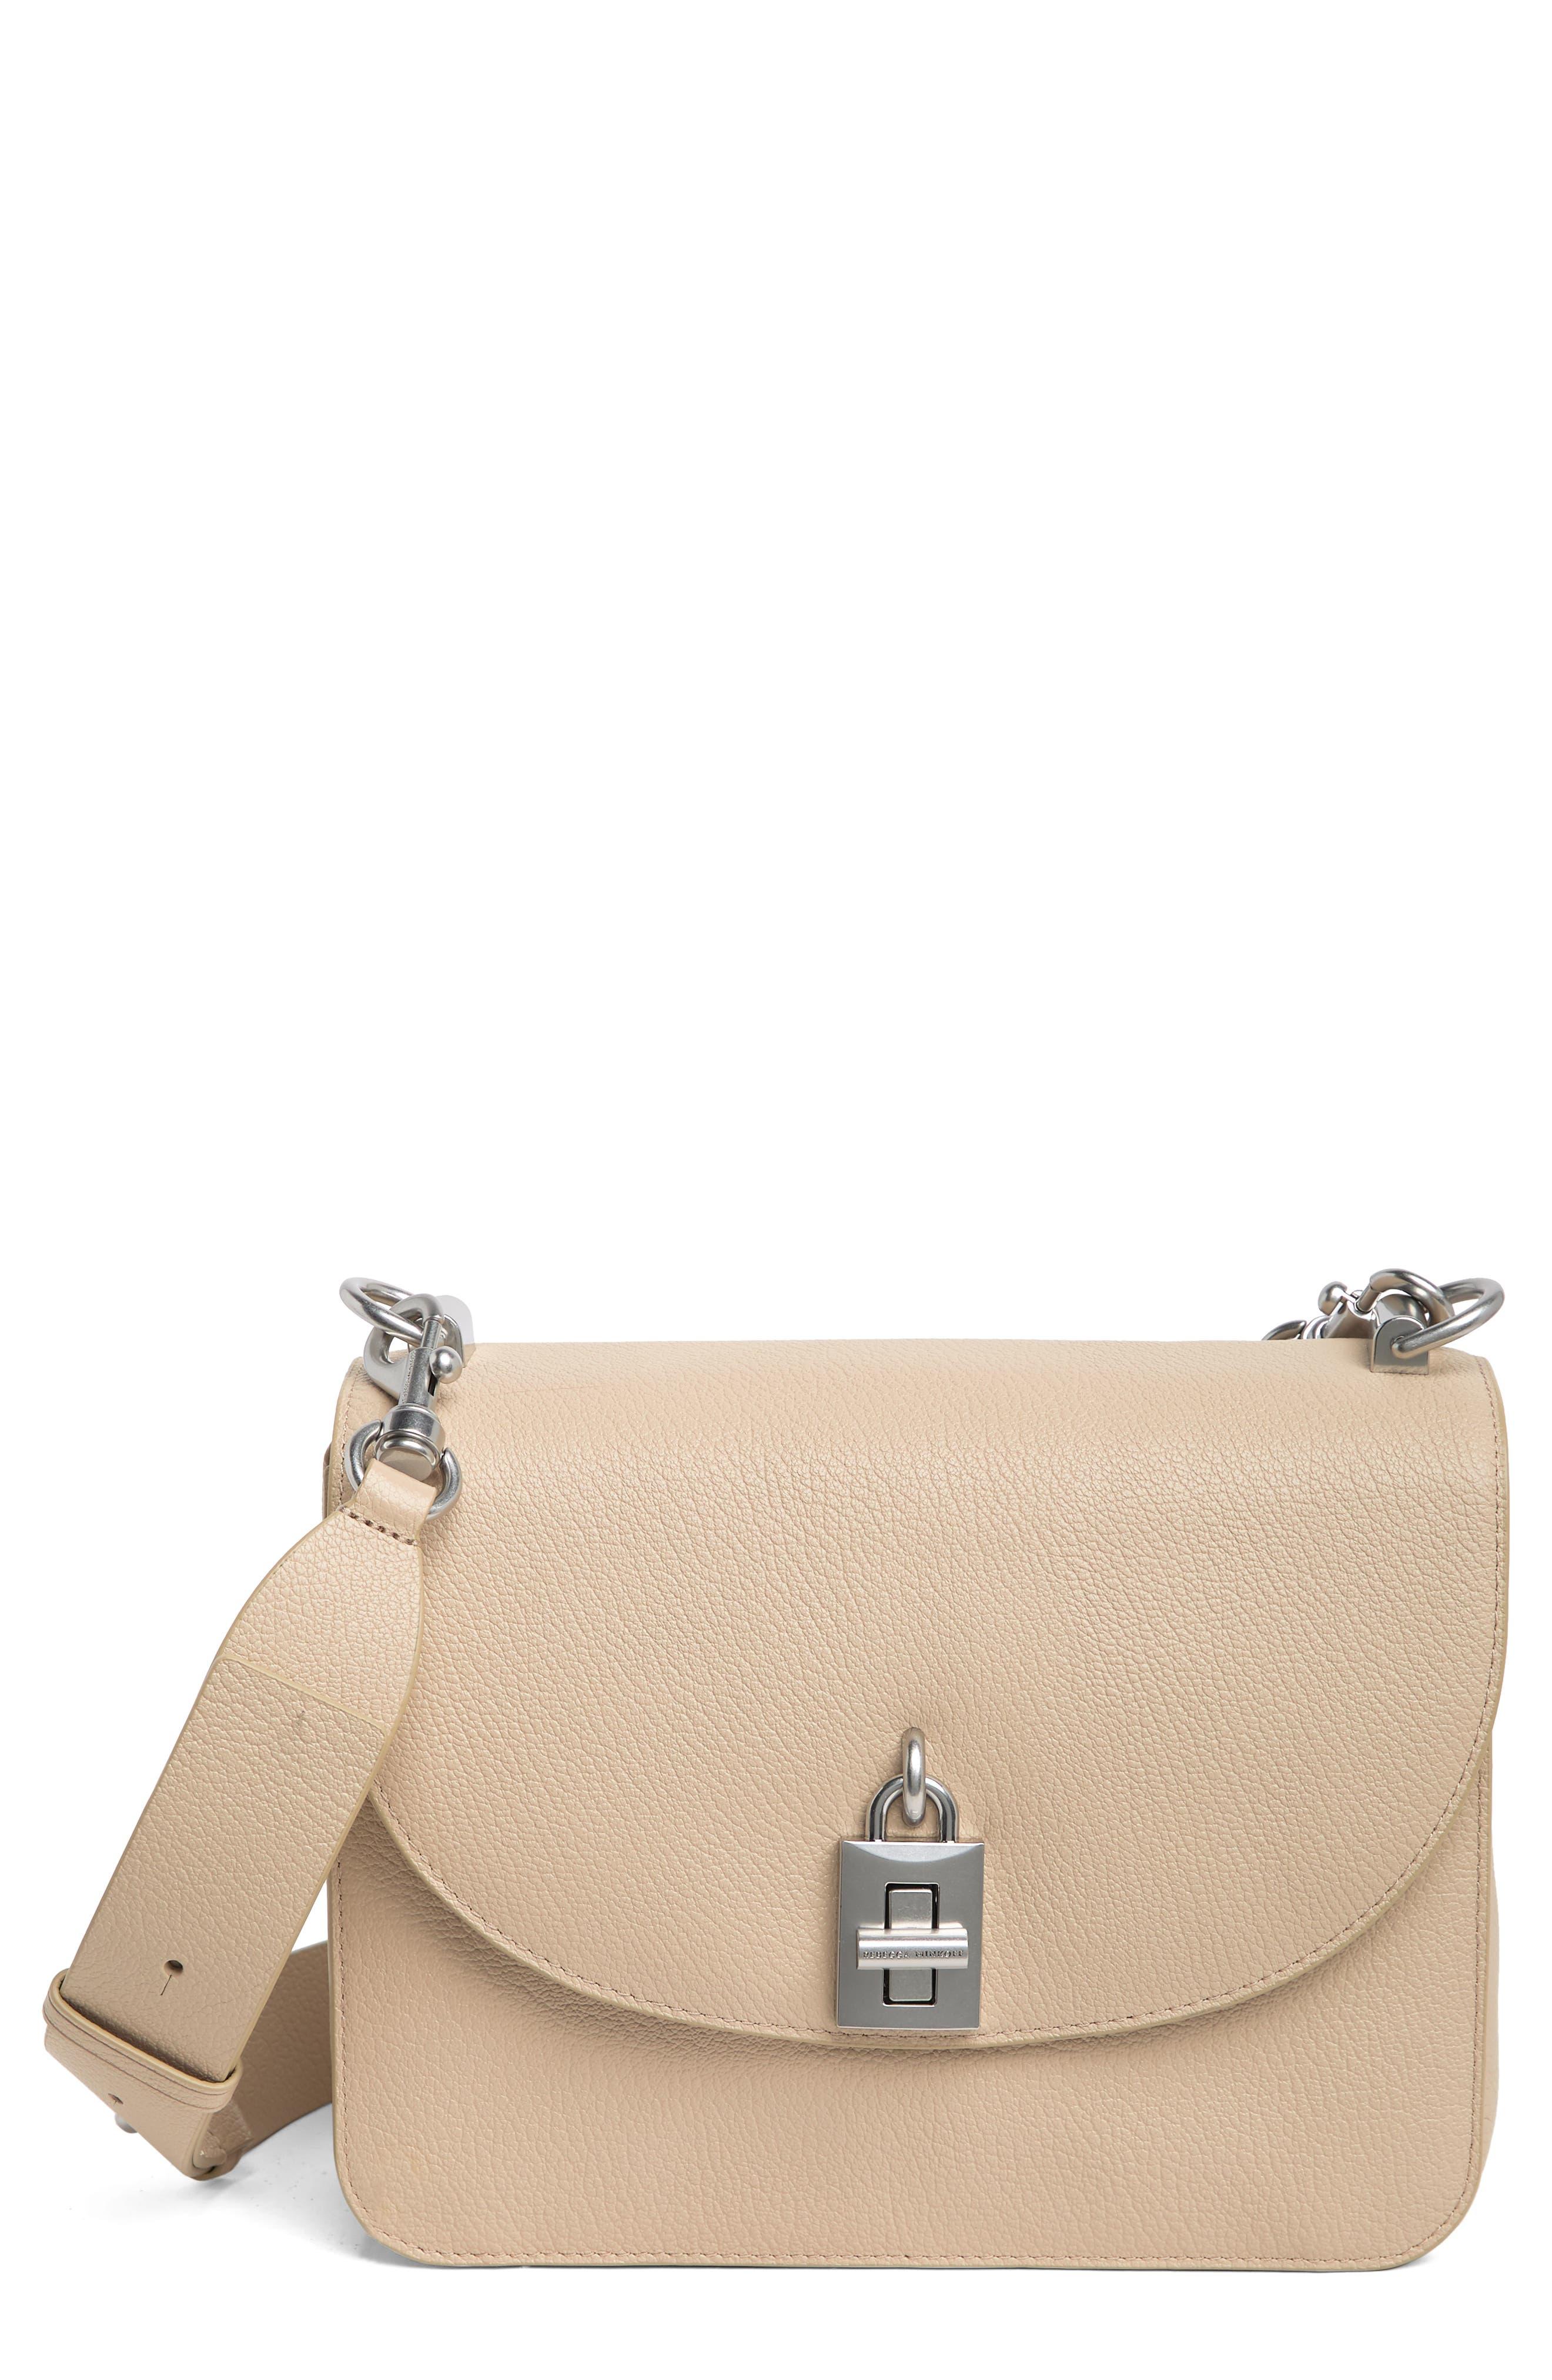 Rebecca Minkoff Large Love Too Leather Crossbody Bag in Natural | Lyst